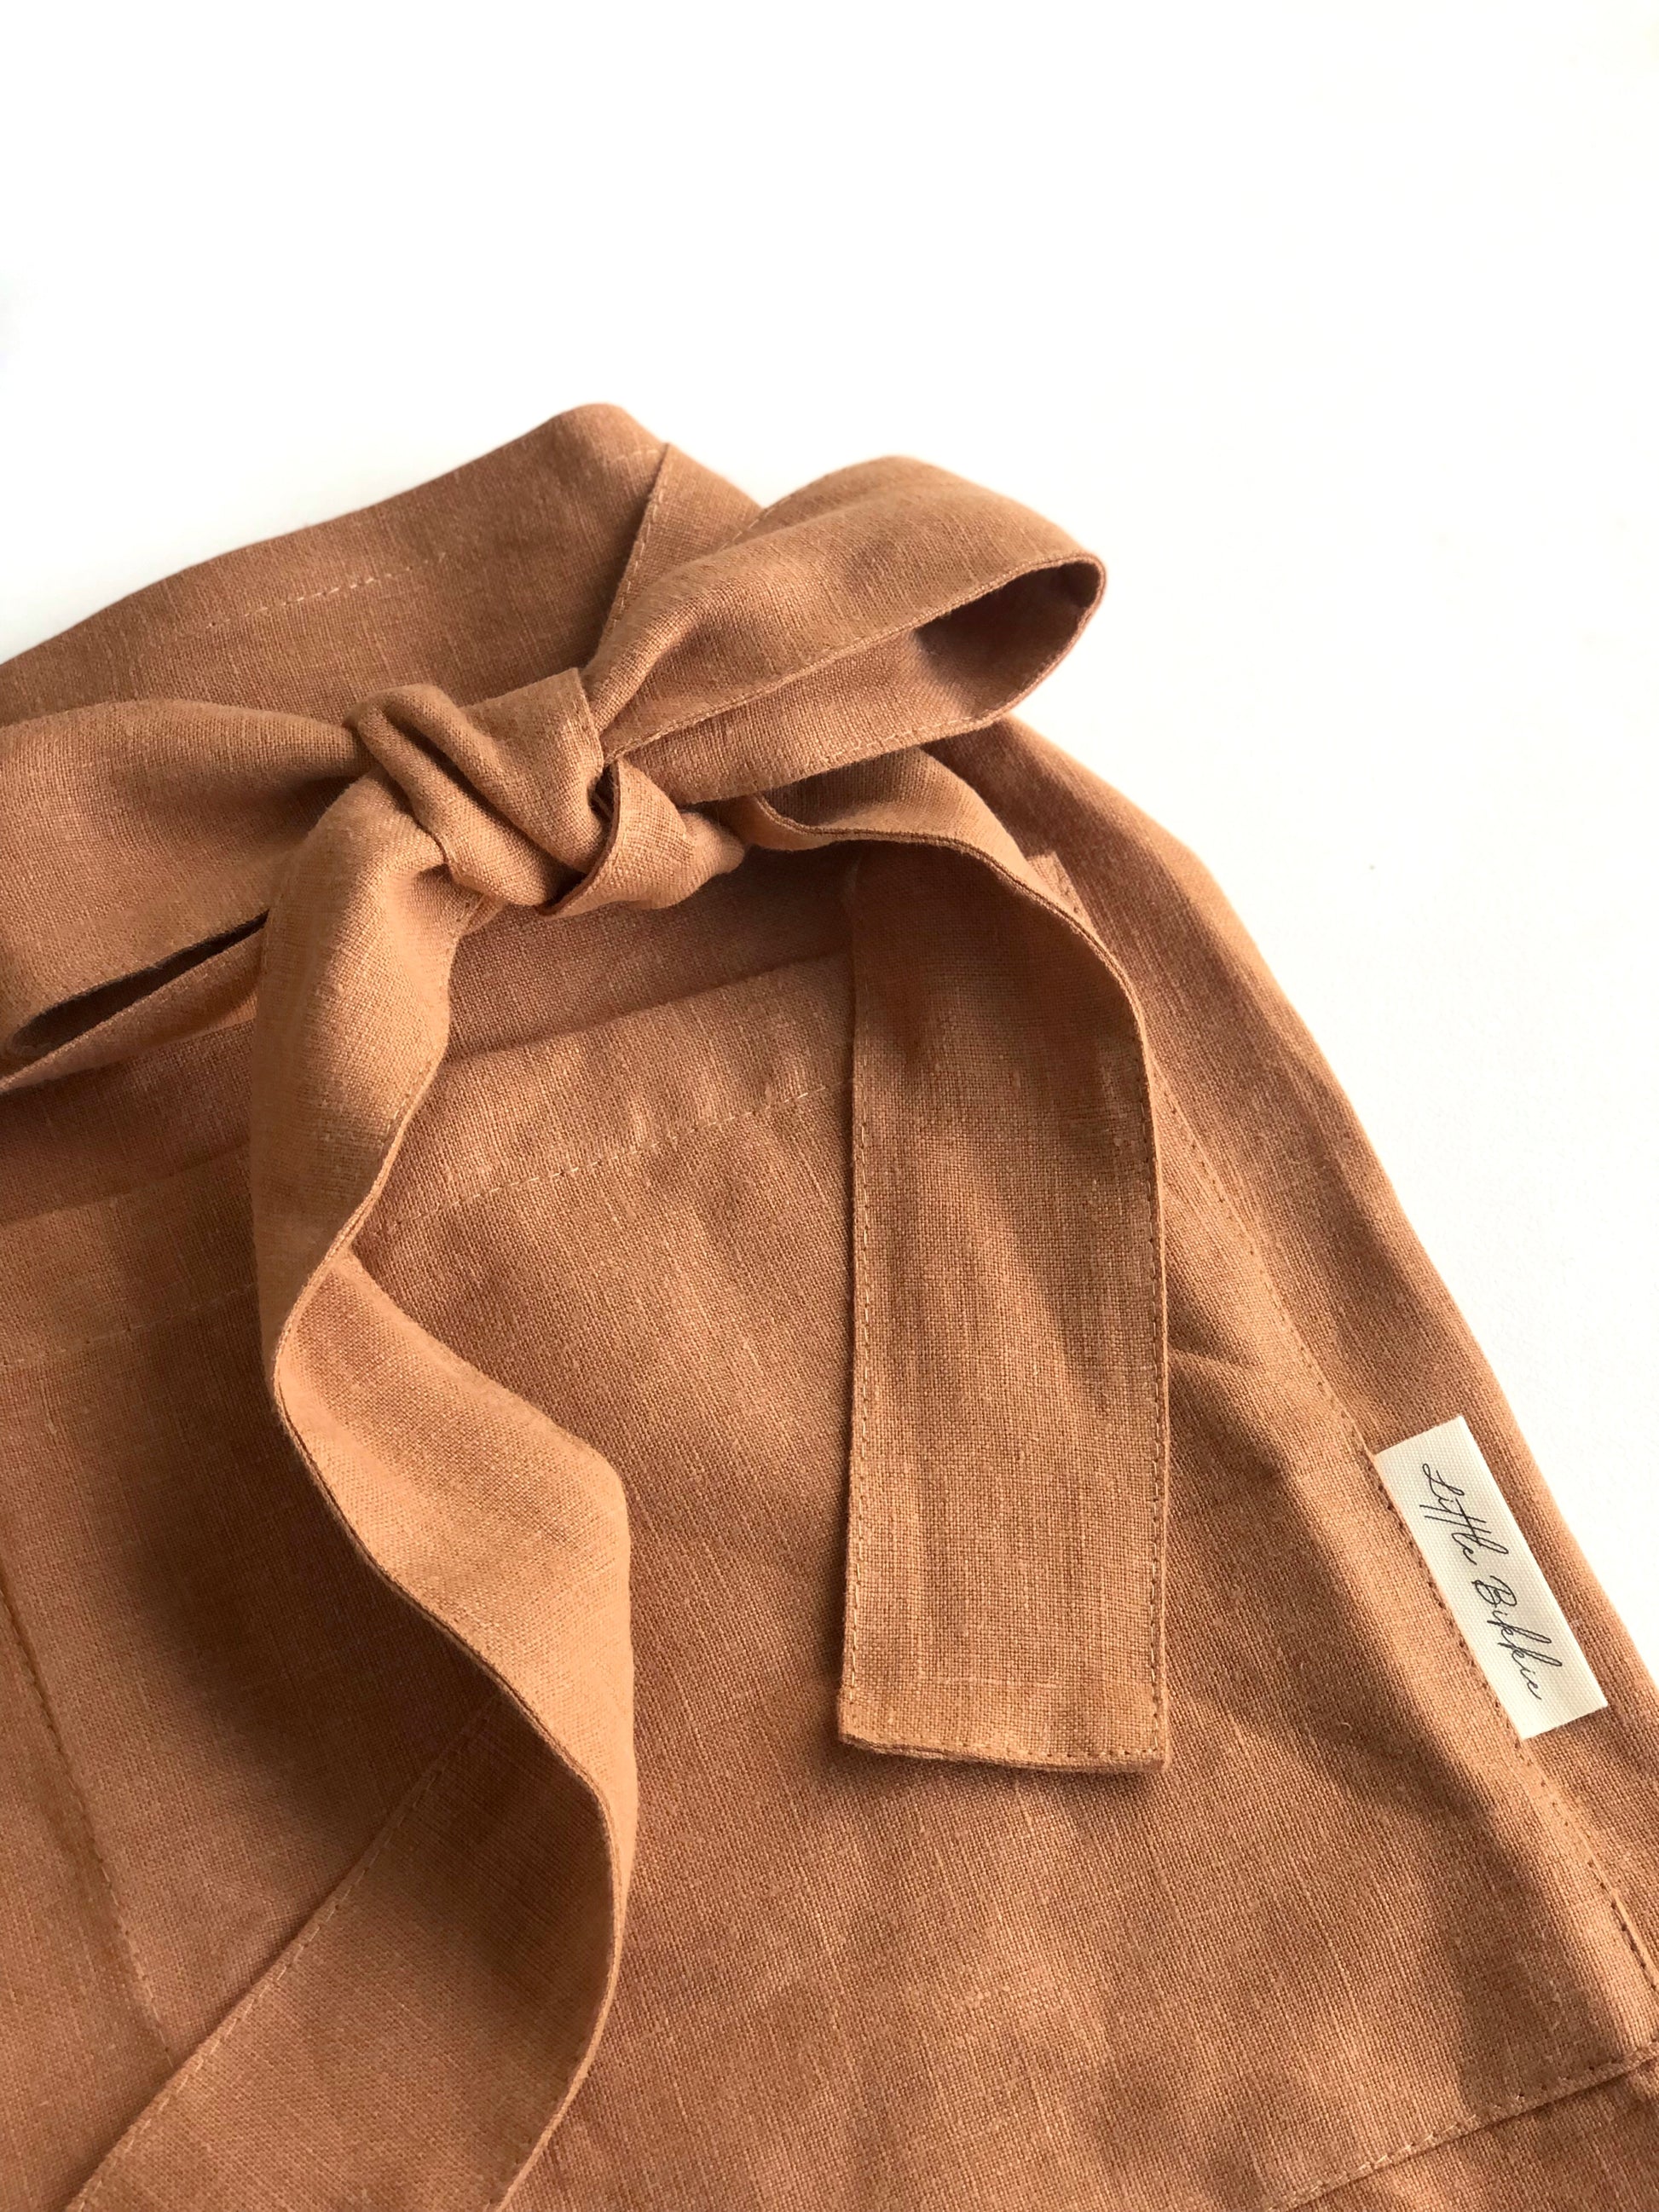 100% linen half waist apron. Large front pocket. Long ties can be fastened at the back or at the front, creating a large bow.Both protective and stylish. Terracotta colour way.